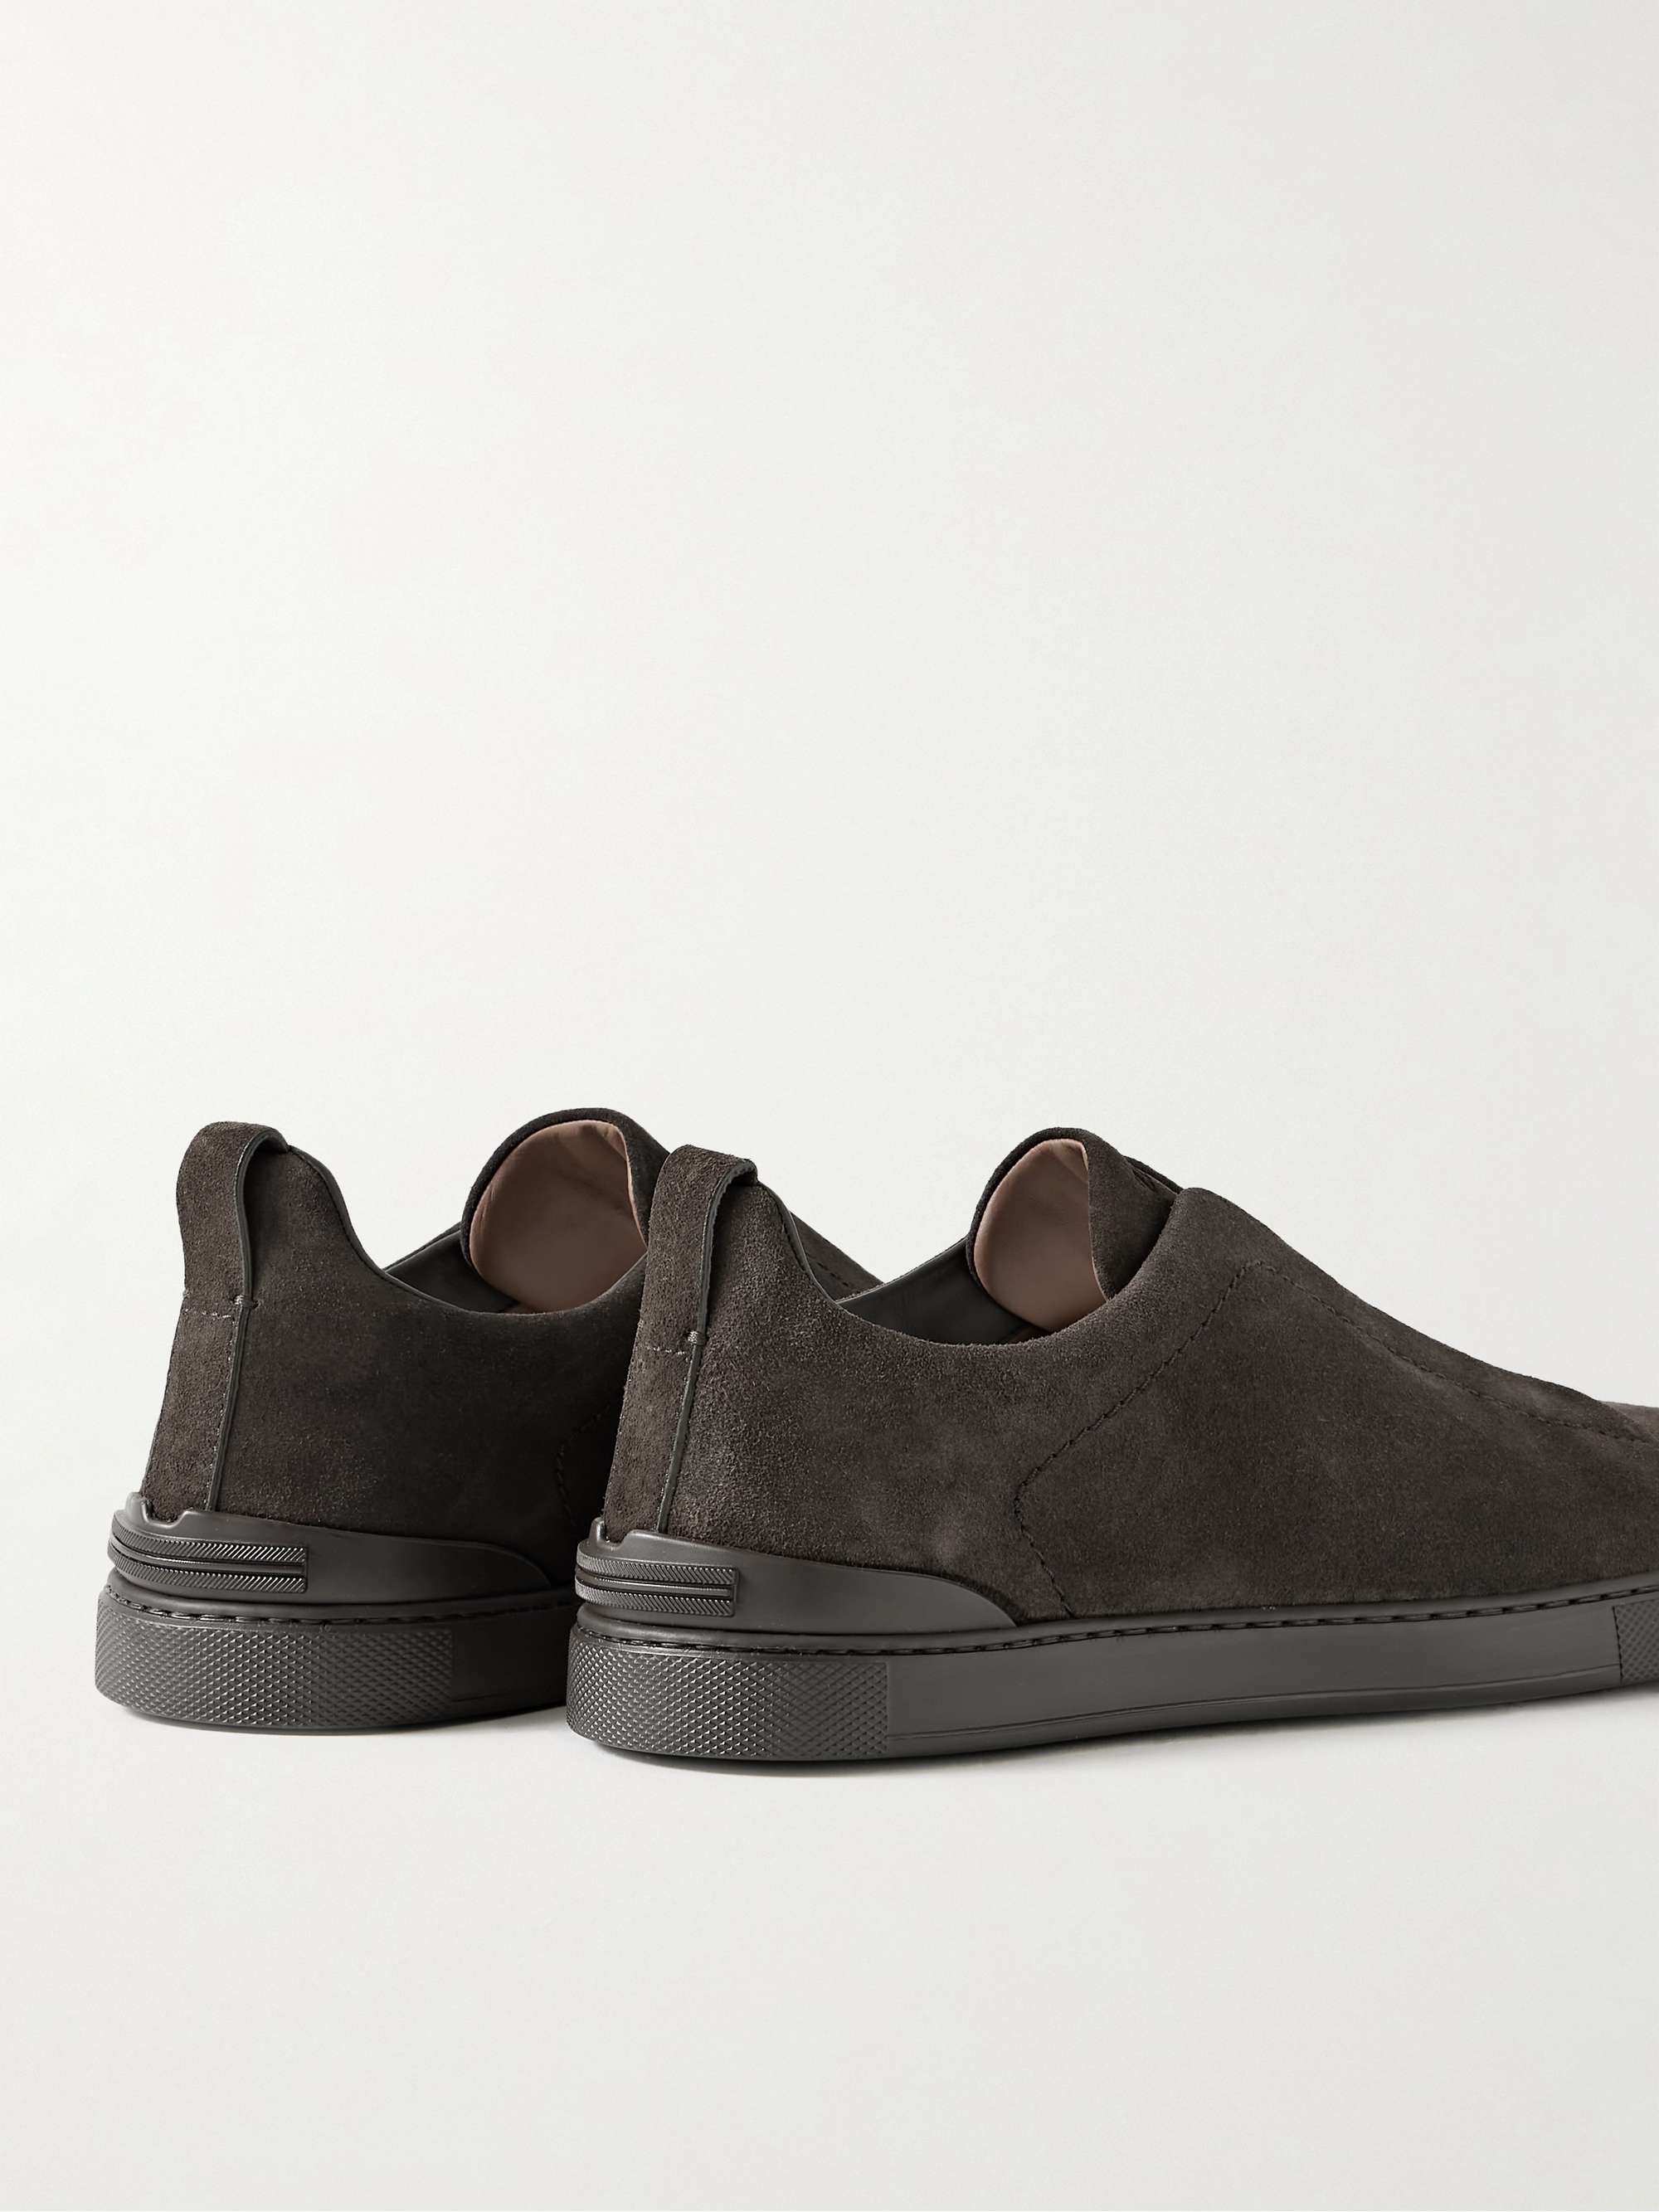 ZEGNA Triple Stitch Suede Sneakers